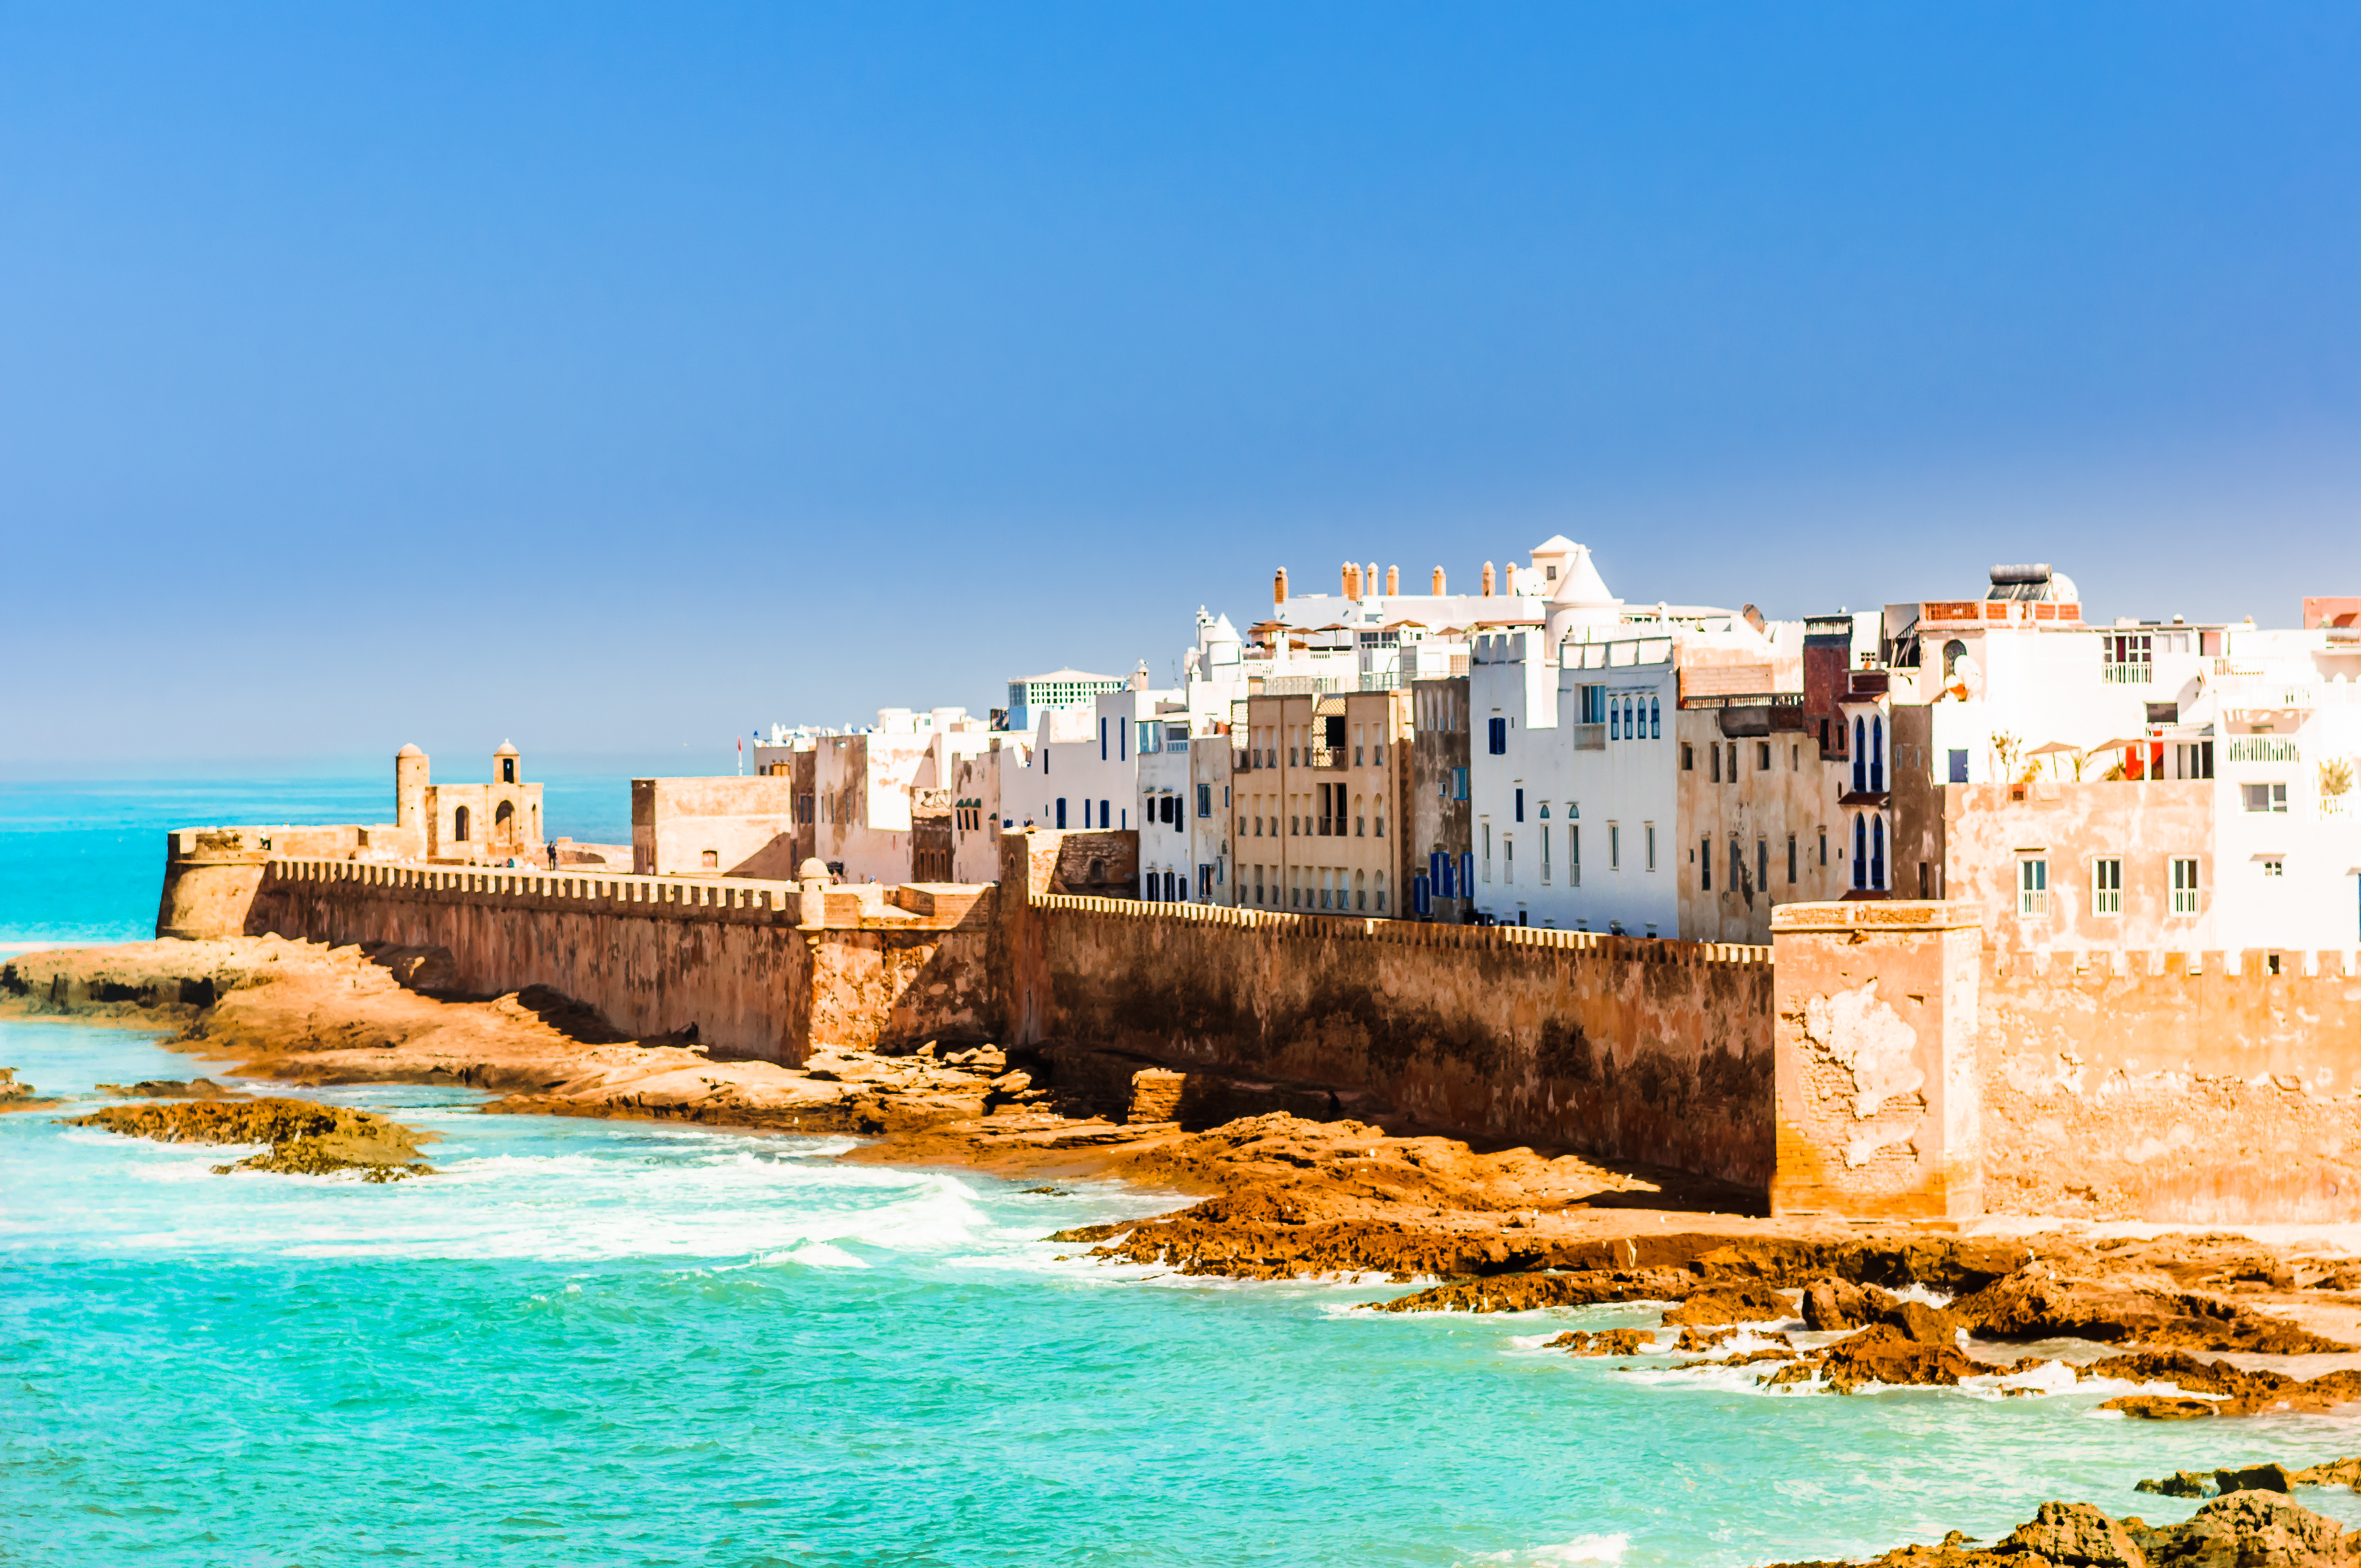 Ryanair operates direct flights from London Stansted to Essaouira (pictured)